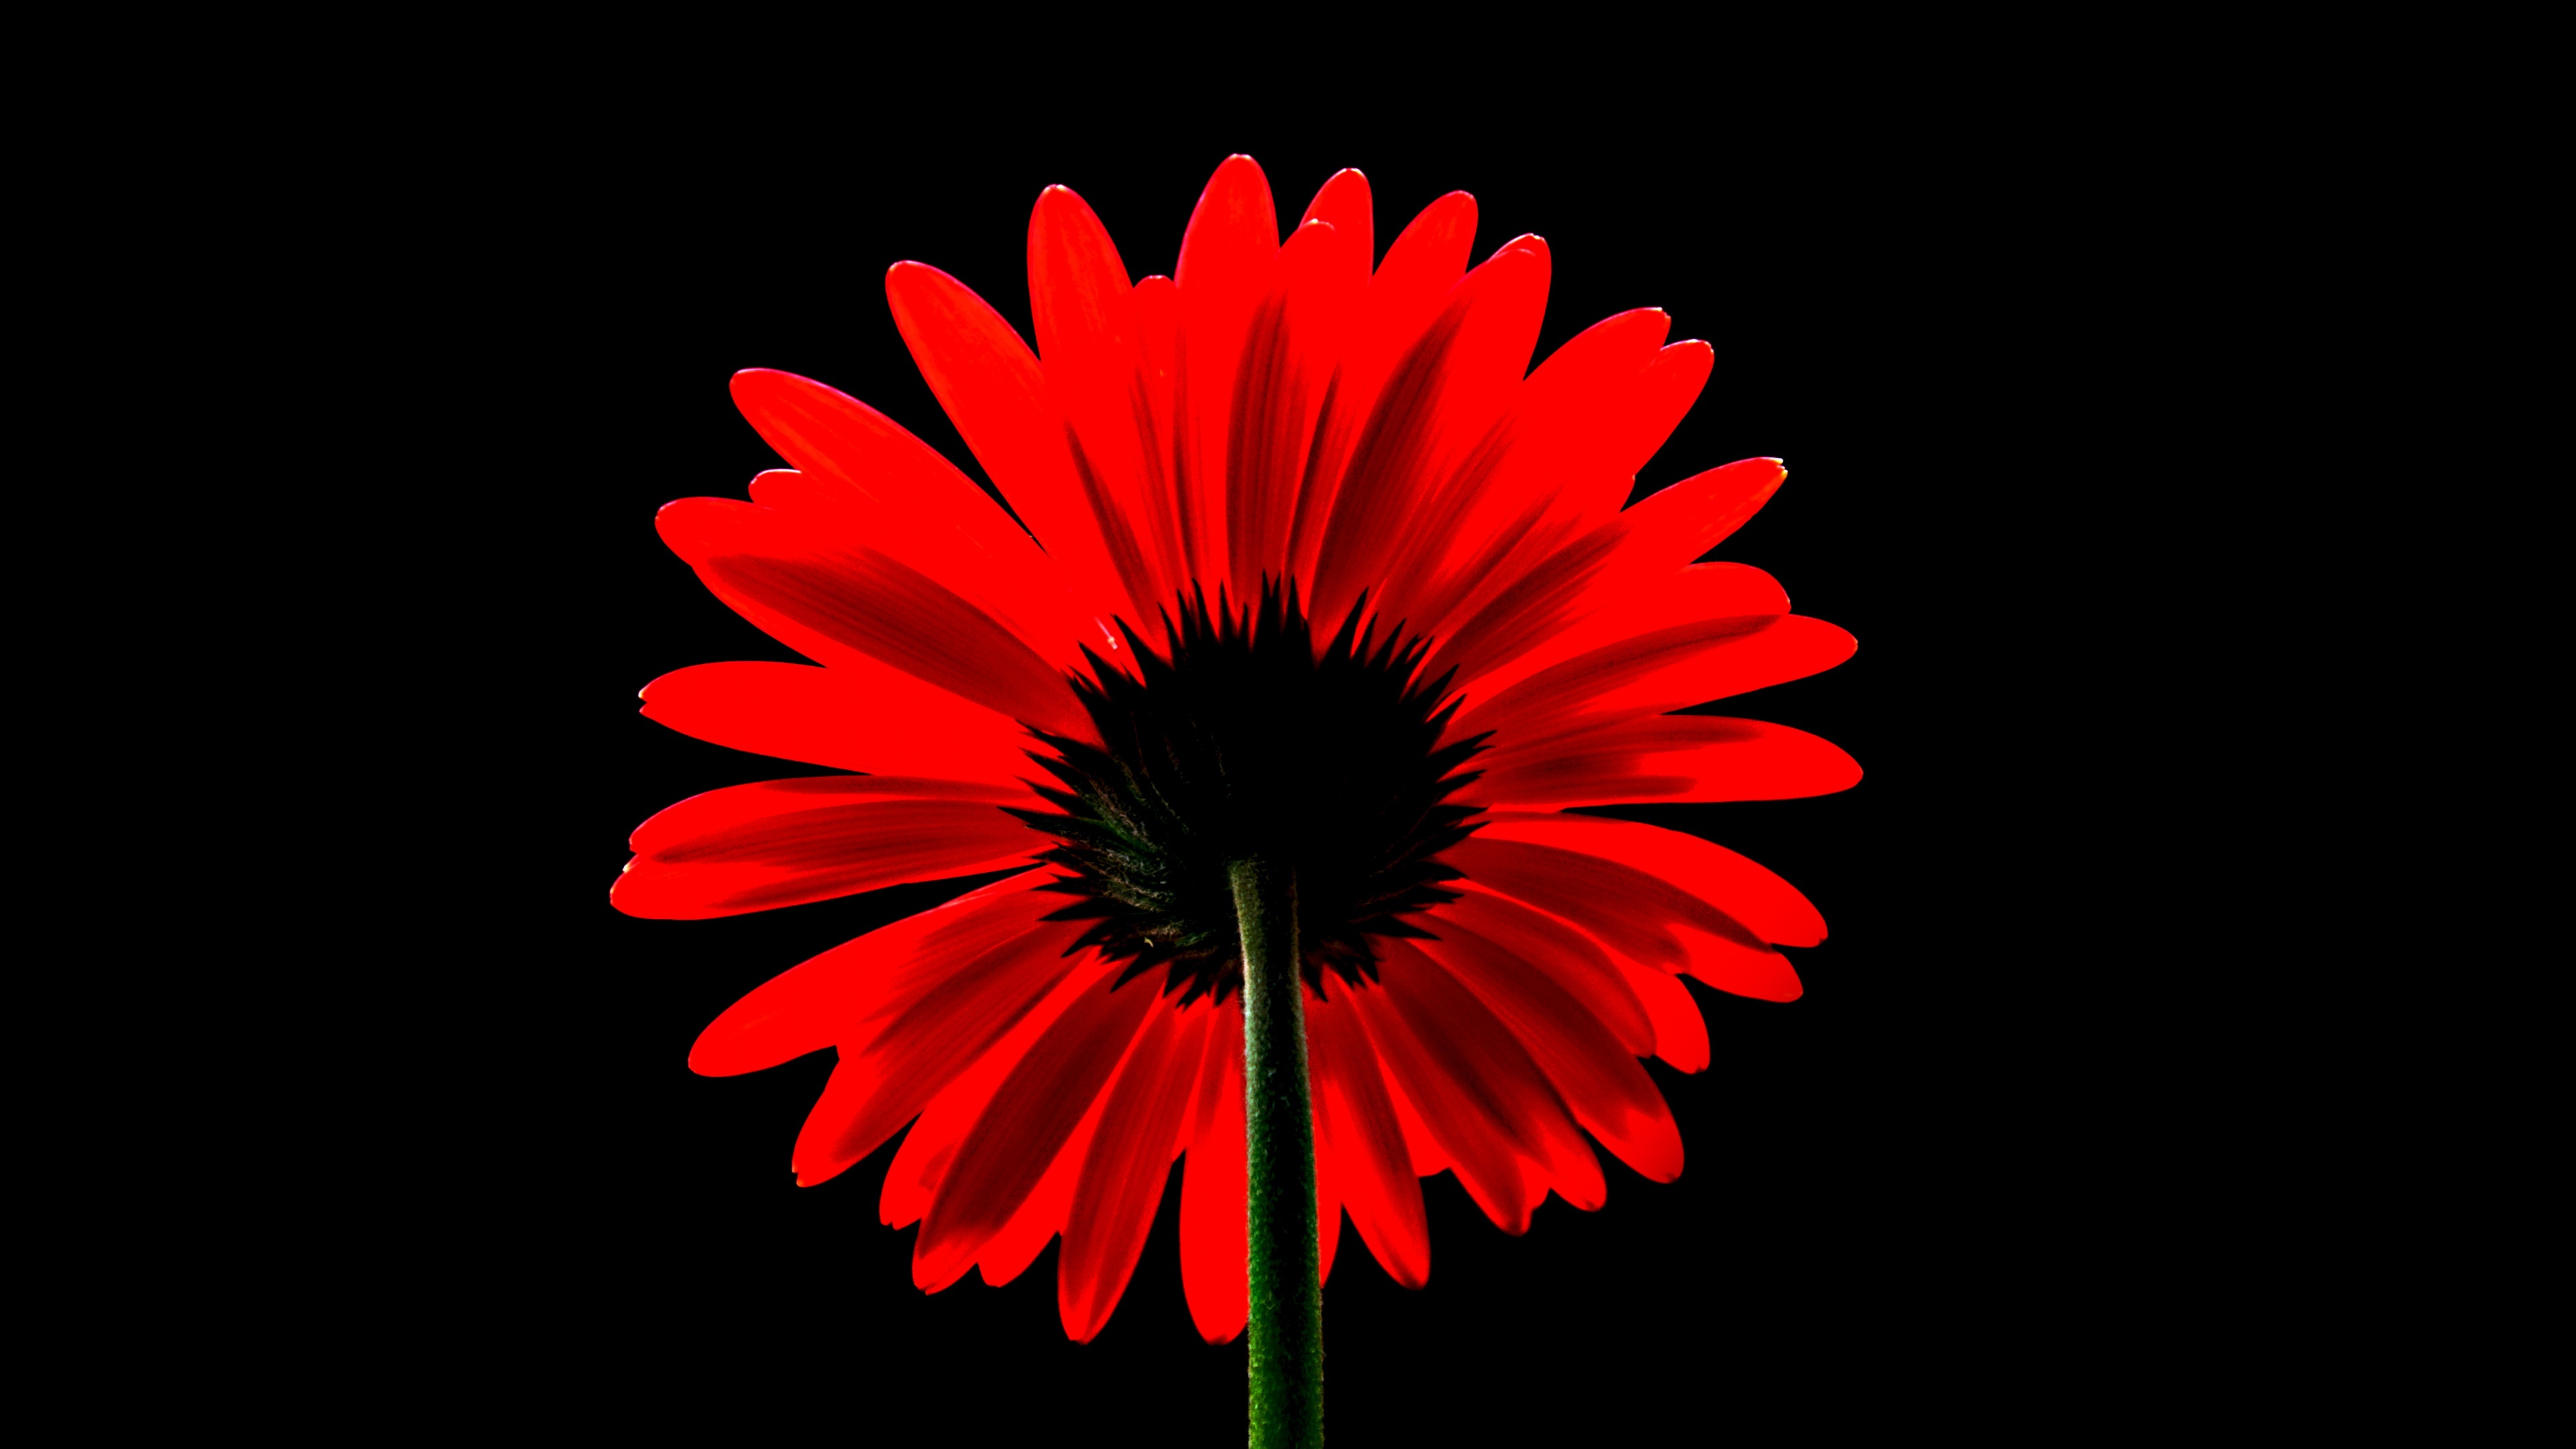 Gerbera Daisy: A genus of plants in the Asteraceae family. 3840x2160 4K Background.